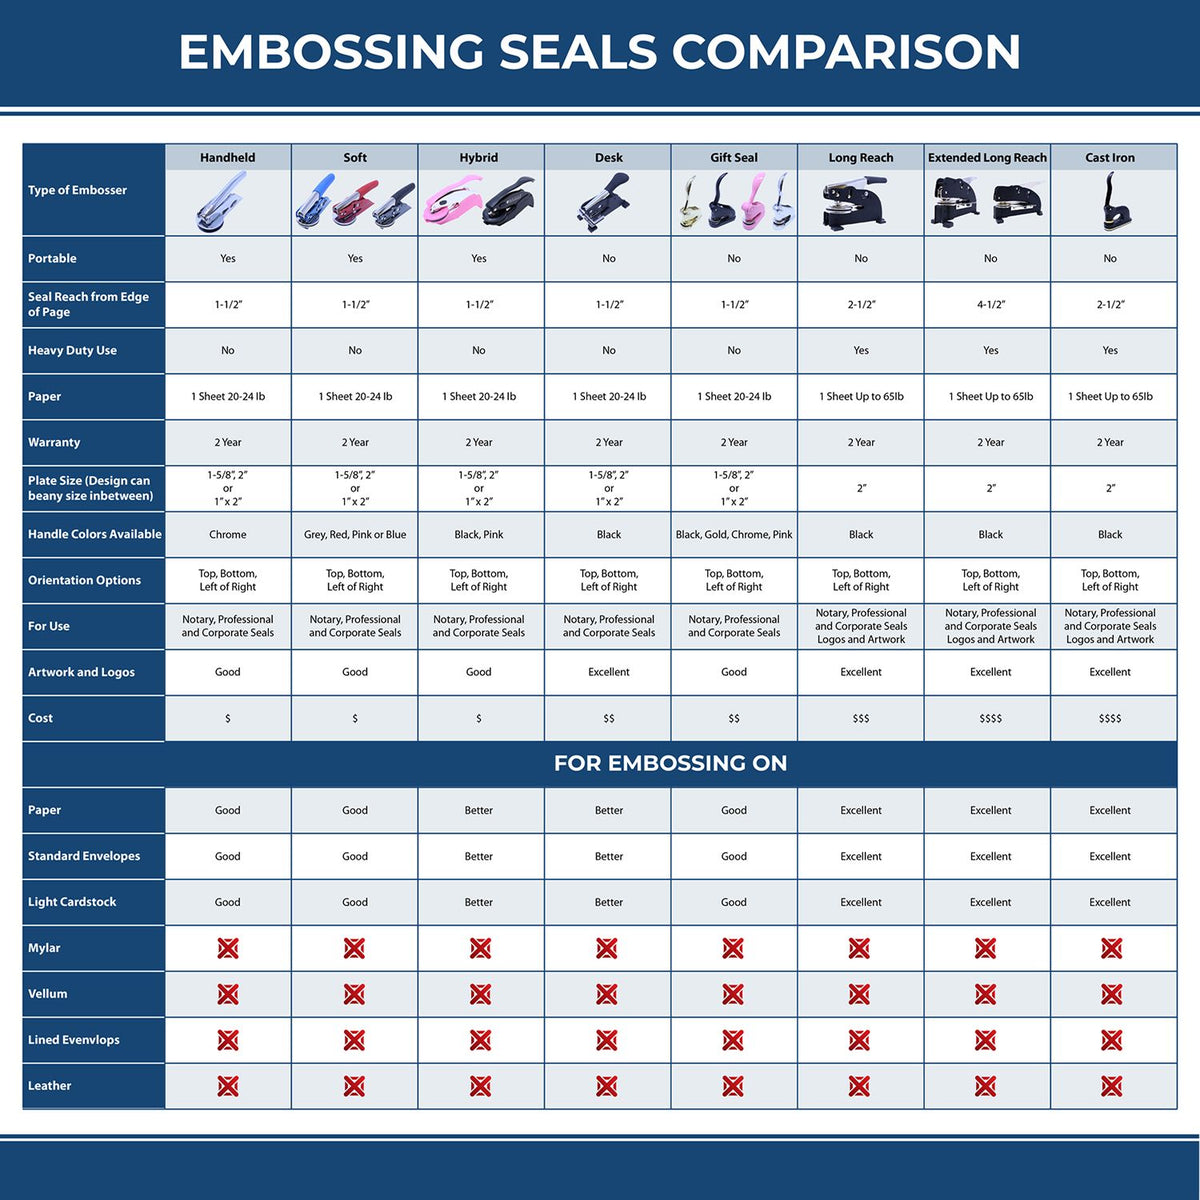 A comparison chart for the different types of mount models available for the Extended Long Reach Connecticut Surveyor Embosser.